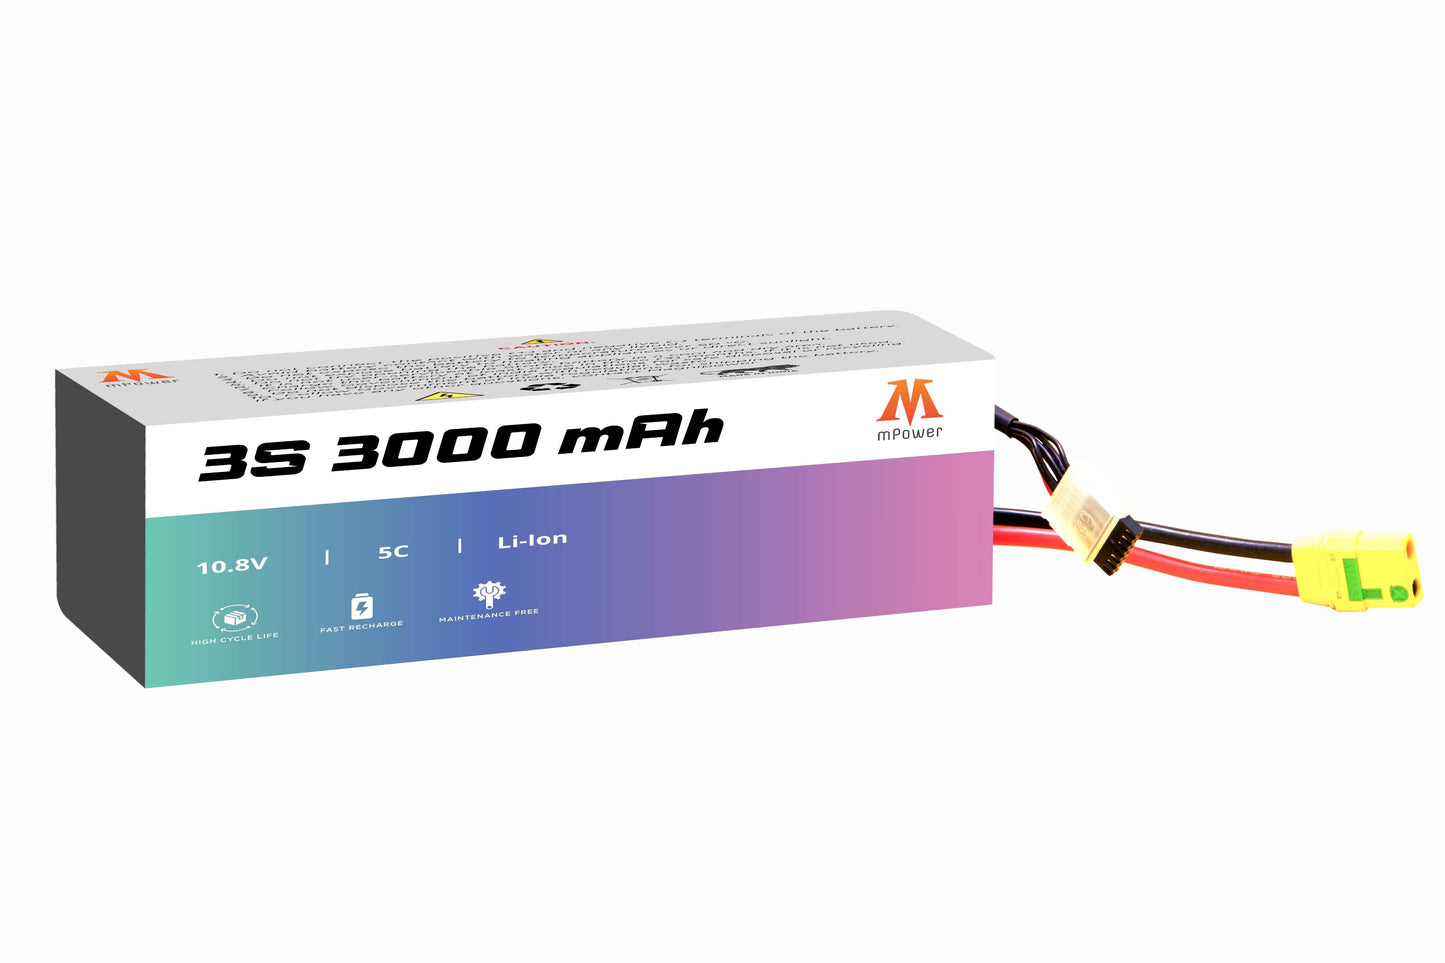 mPower 3S 3000mAh Lithium-Ion Battery for Survey Drones